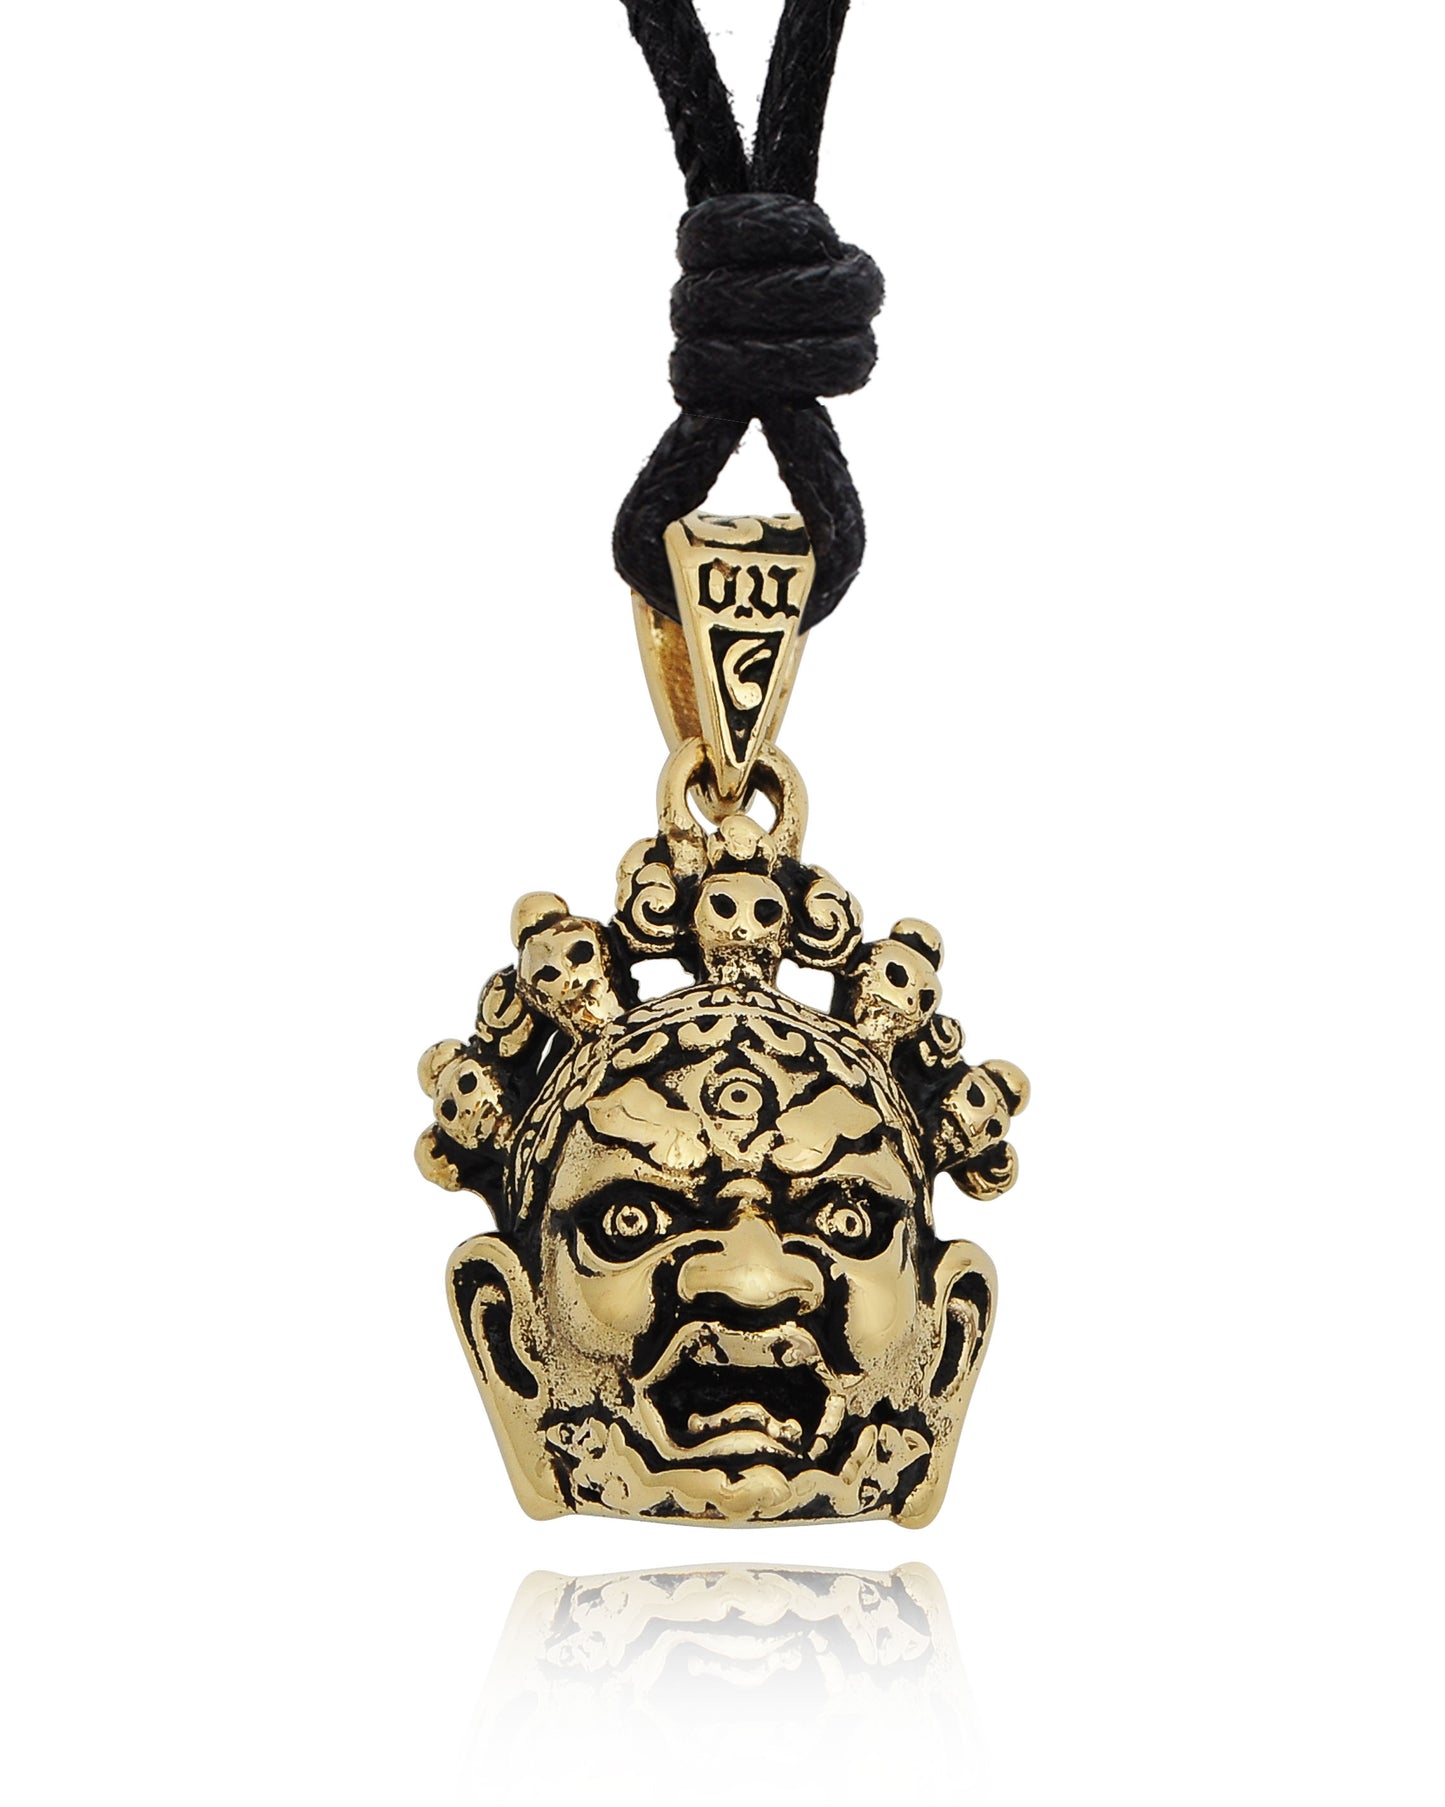 New Japanese Hannya Mask Handmade Brass Charm Necklace Pendant Jewelry With Cotton Cord